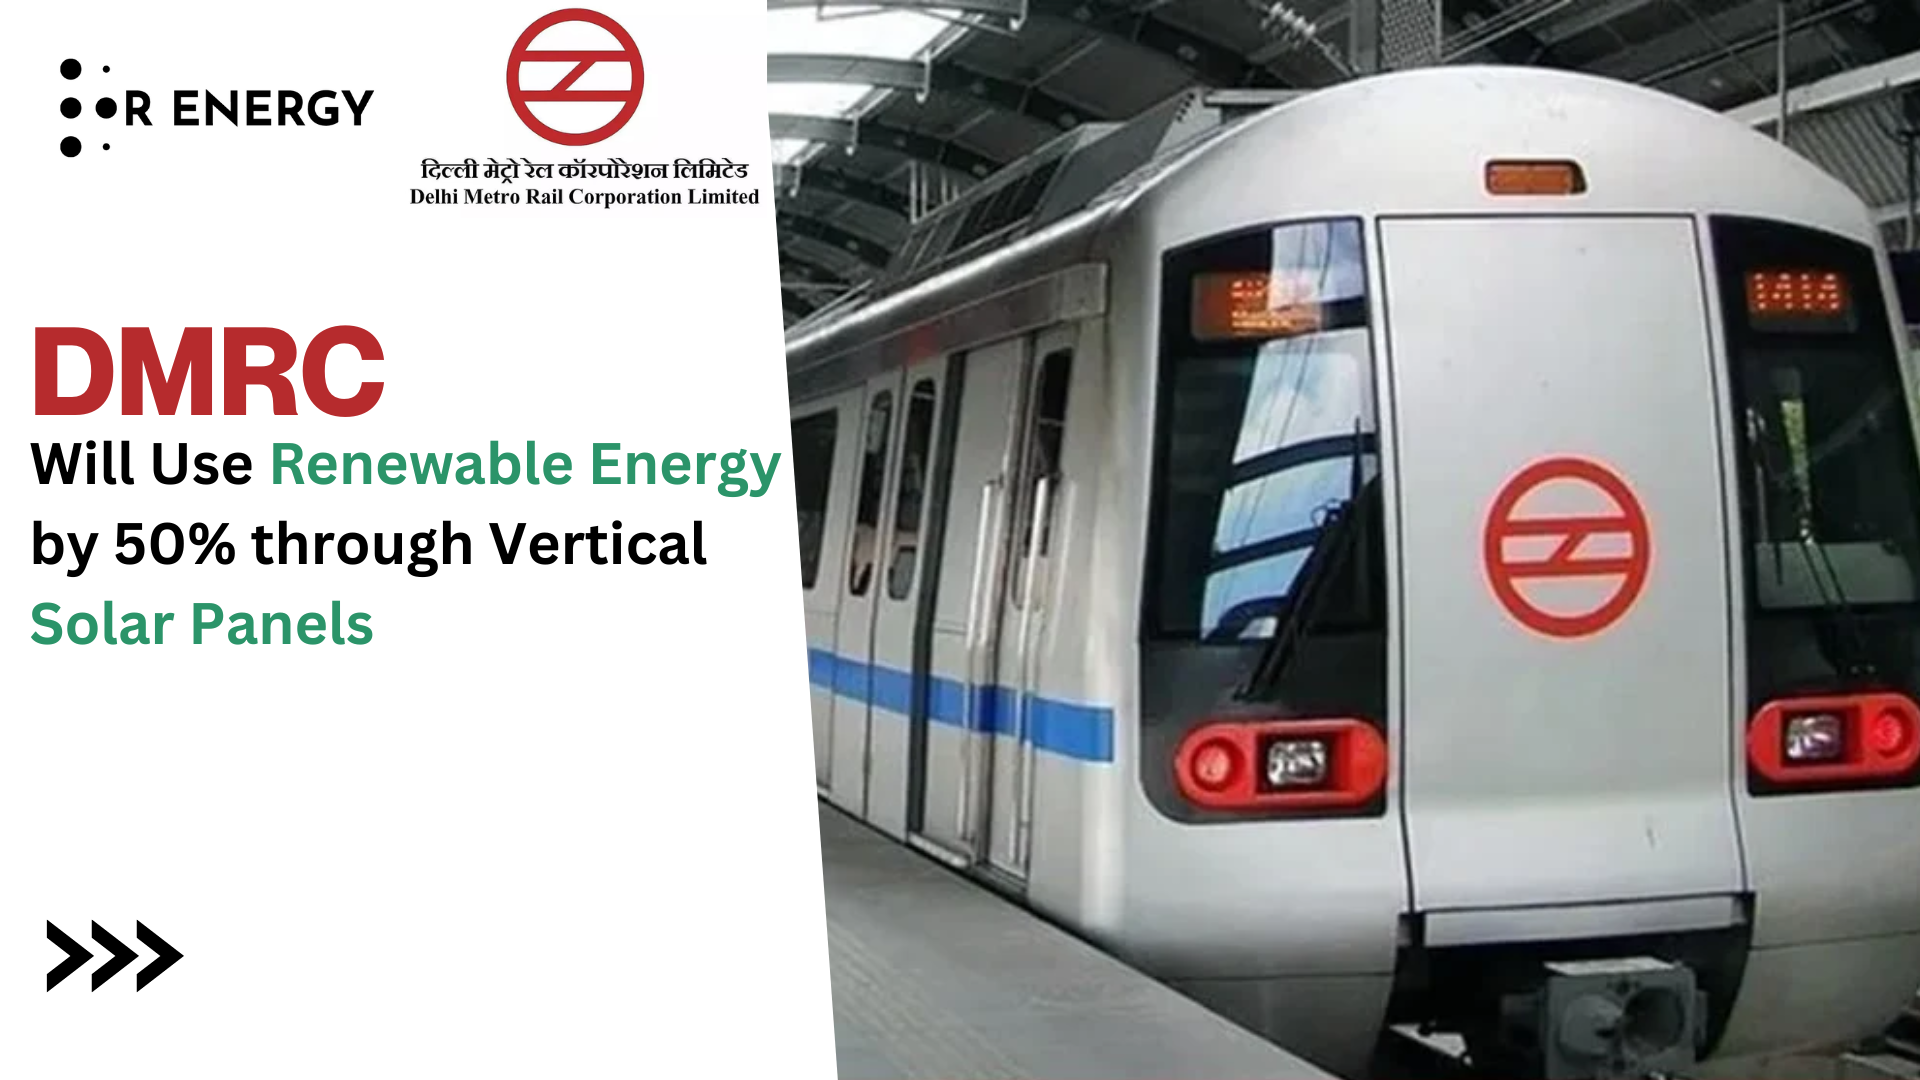 https://renergyinfo.com/dmrc-to-increase-use-of-renewable-energy-by-50-through-vertical-solar-panels/